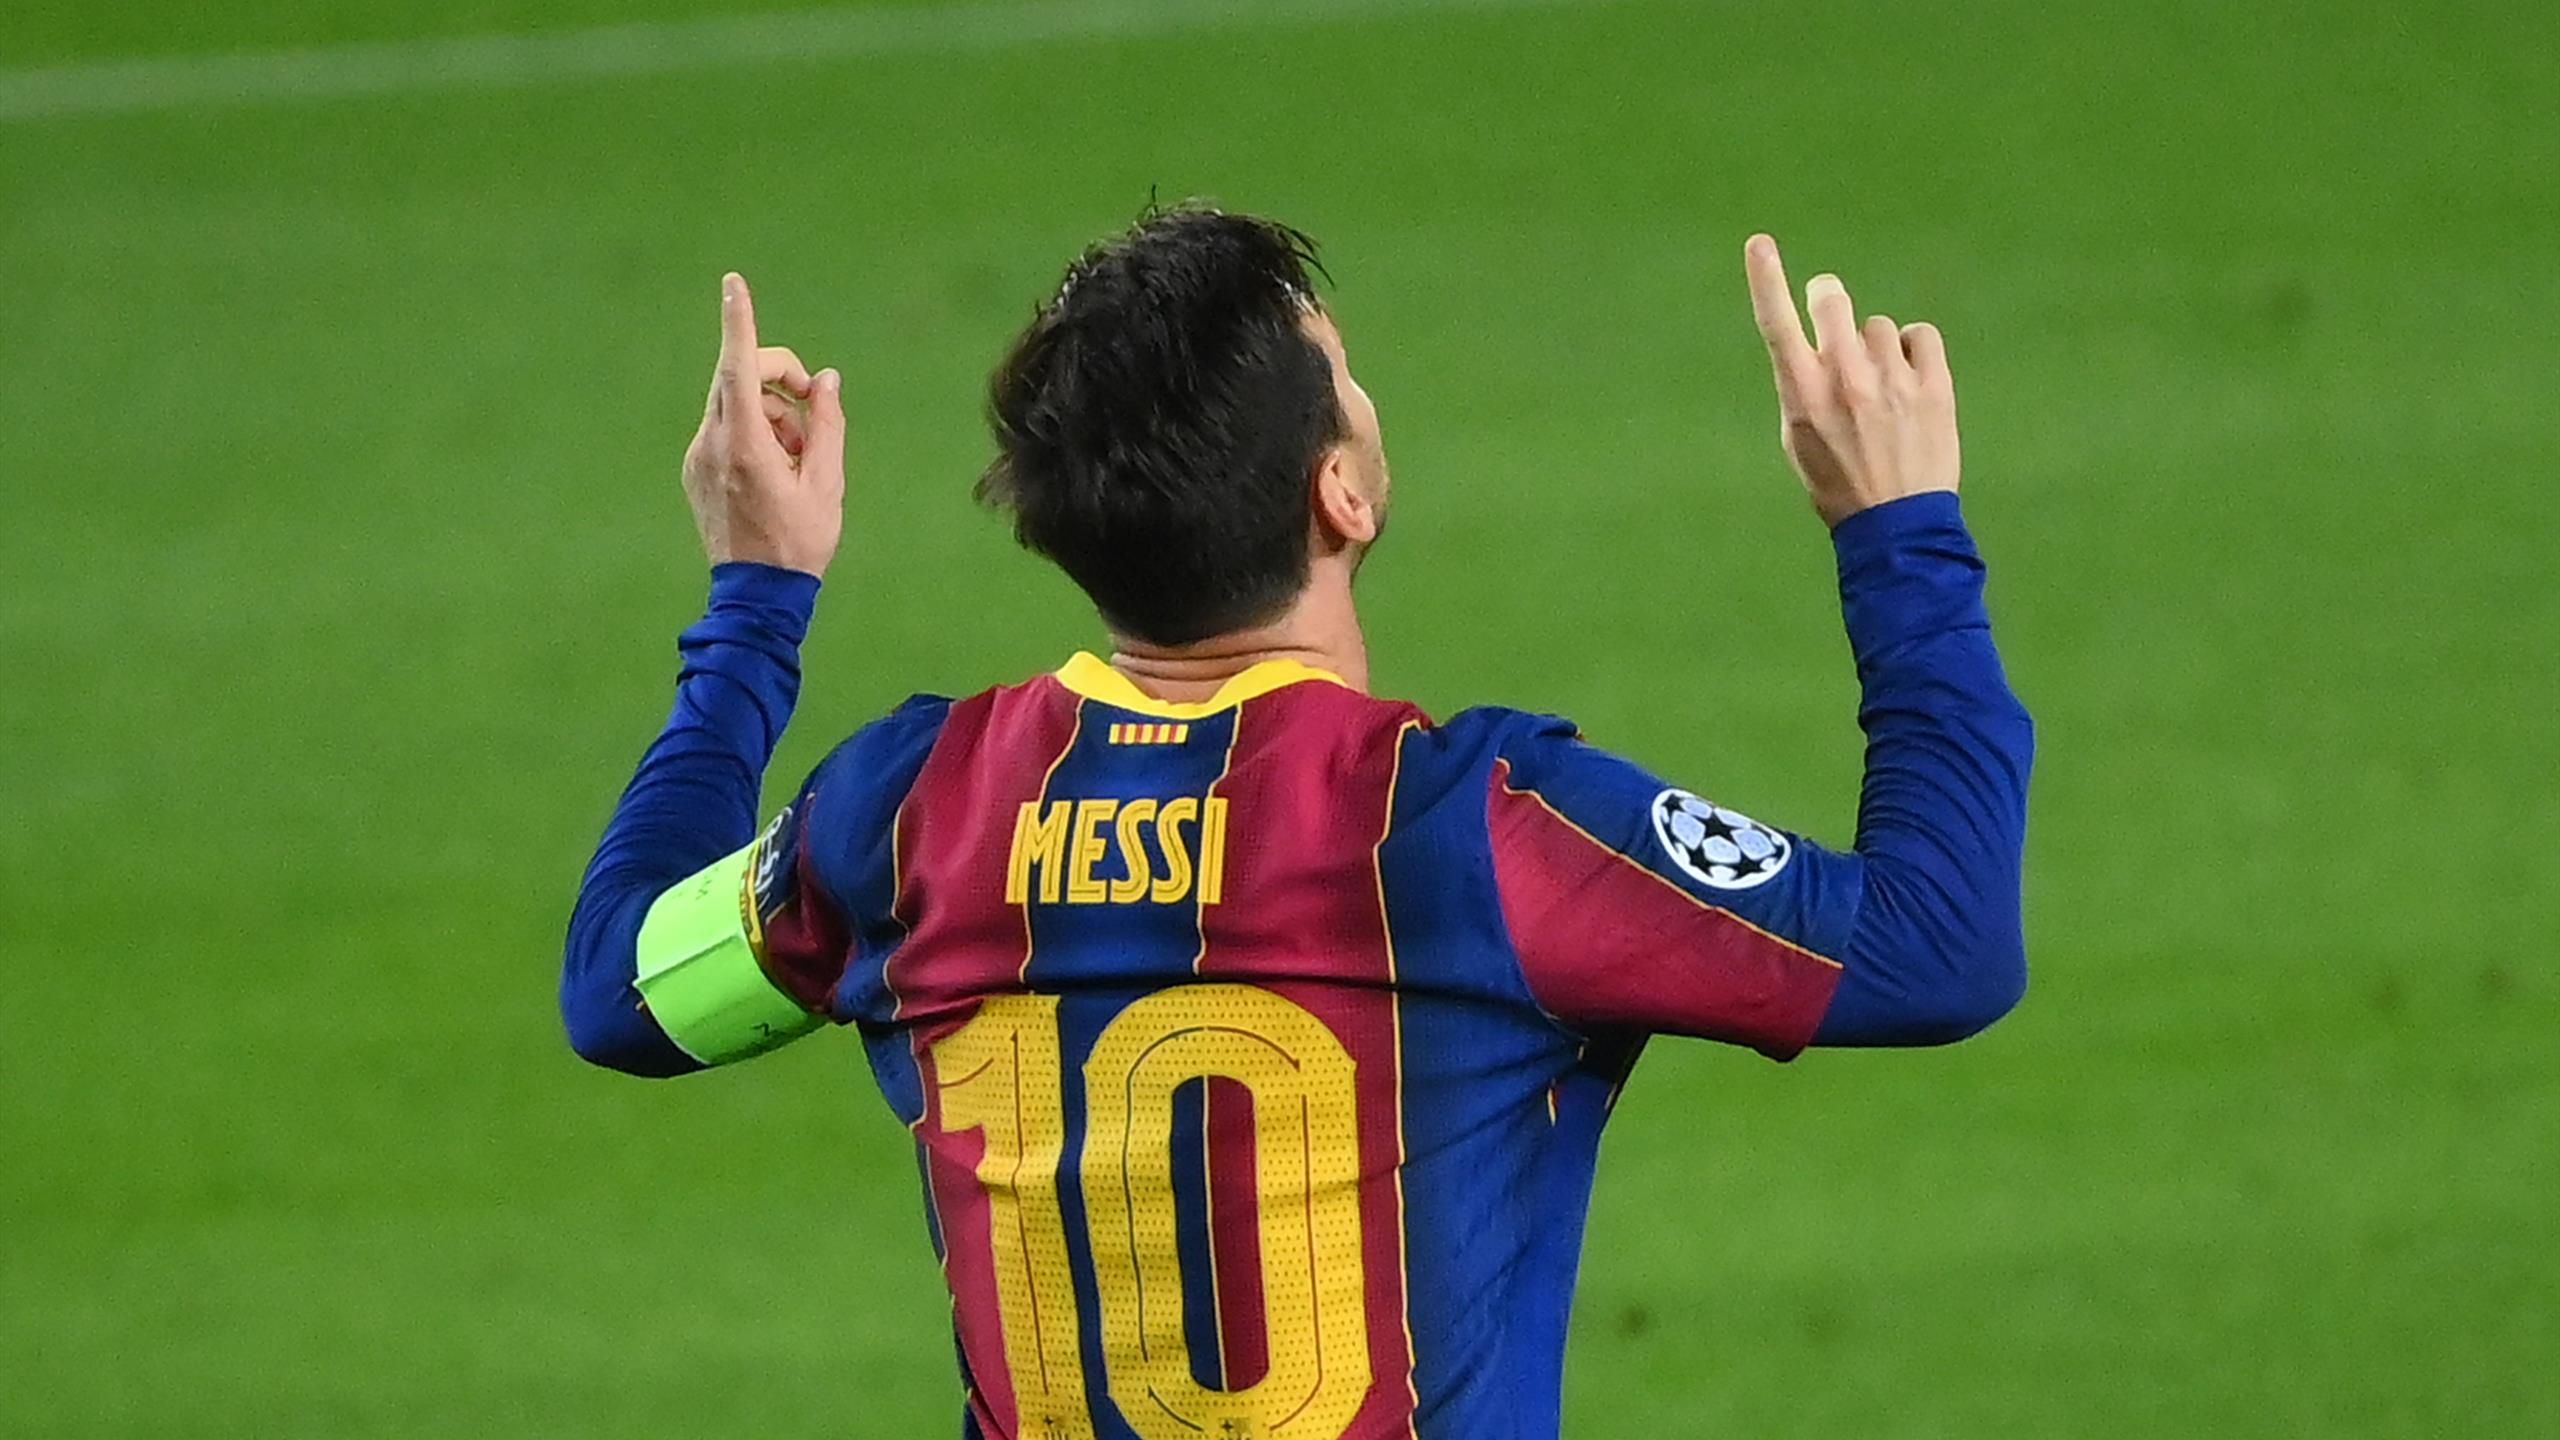 Flashes of Lionel Messi magic, but his role in Koeman's Barcelona team remains unclear -